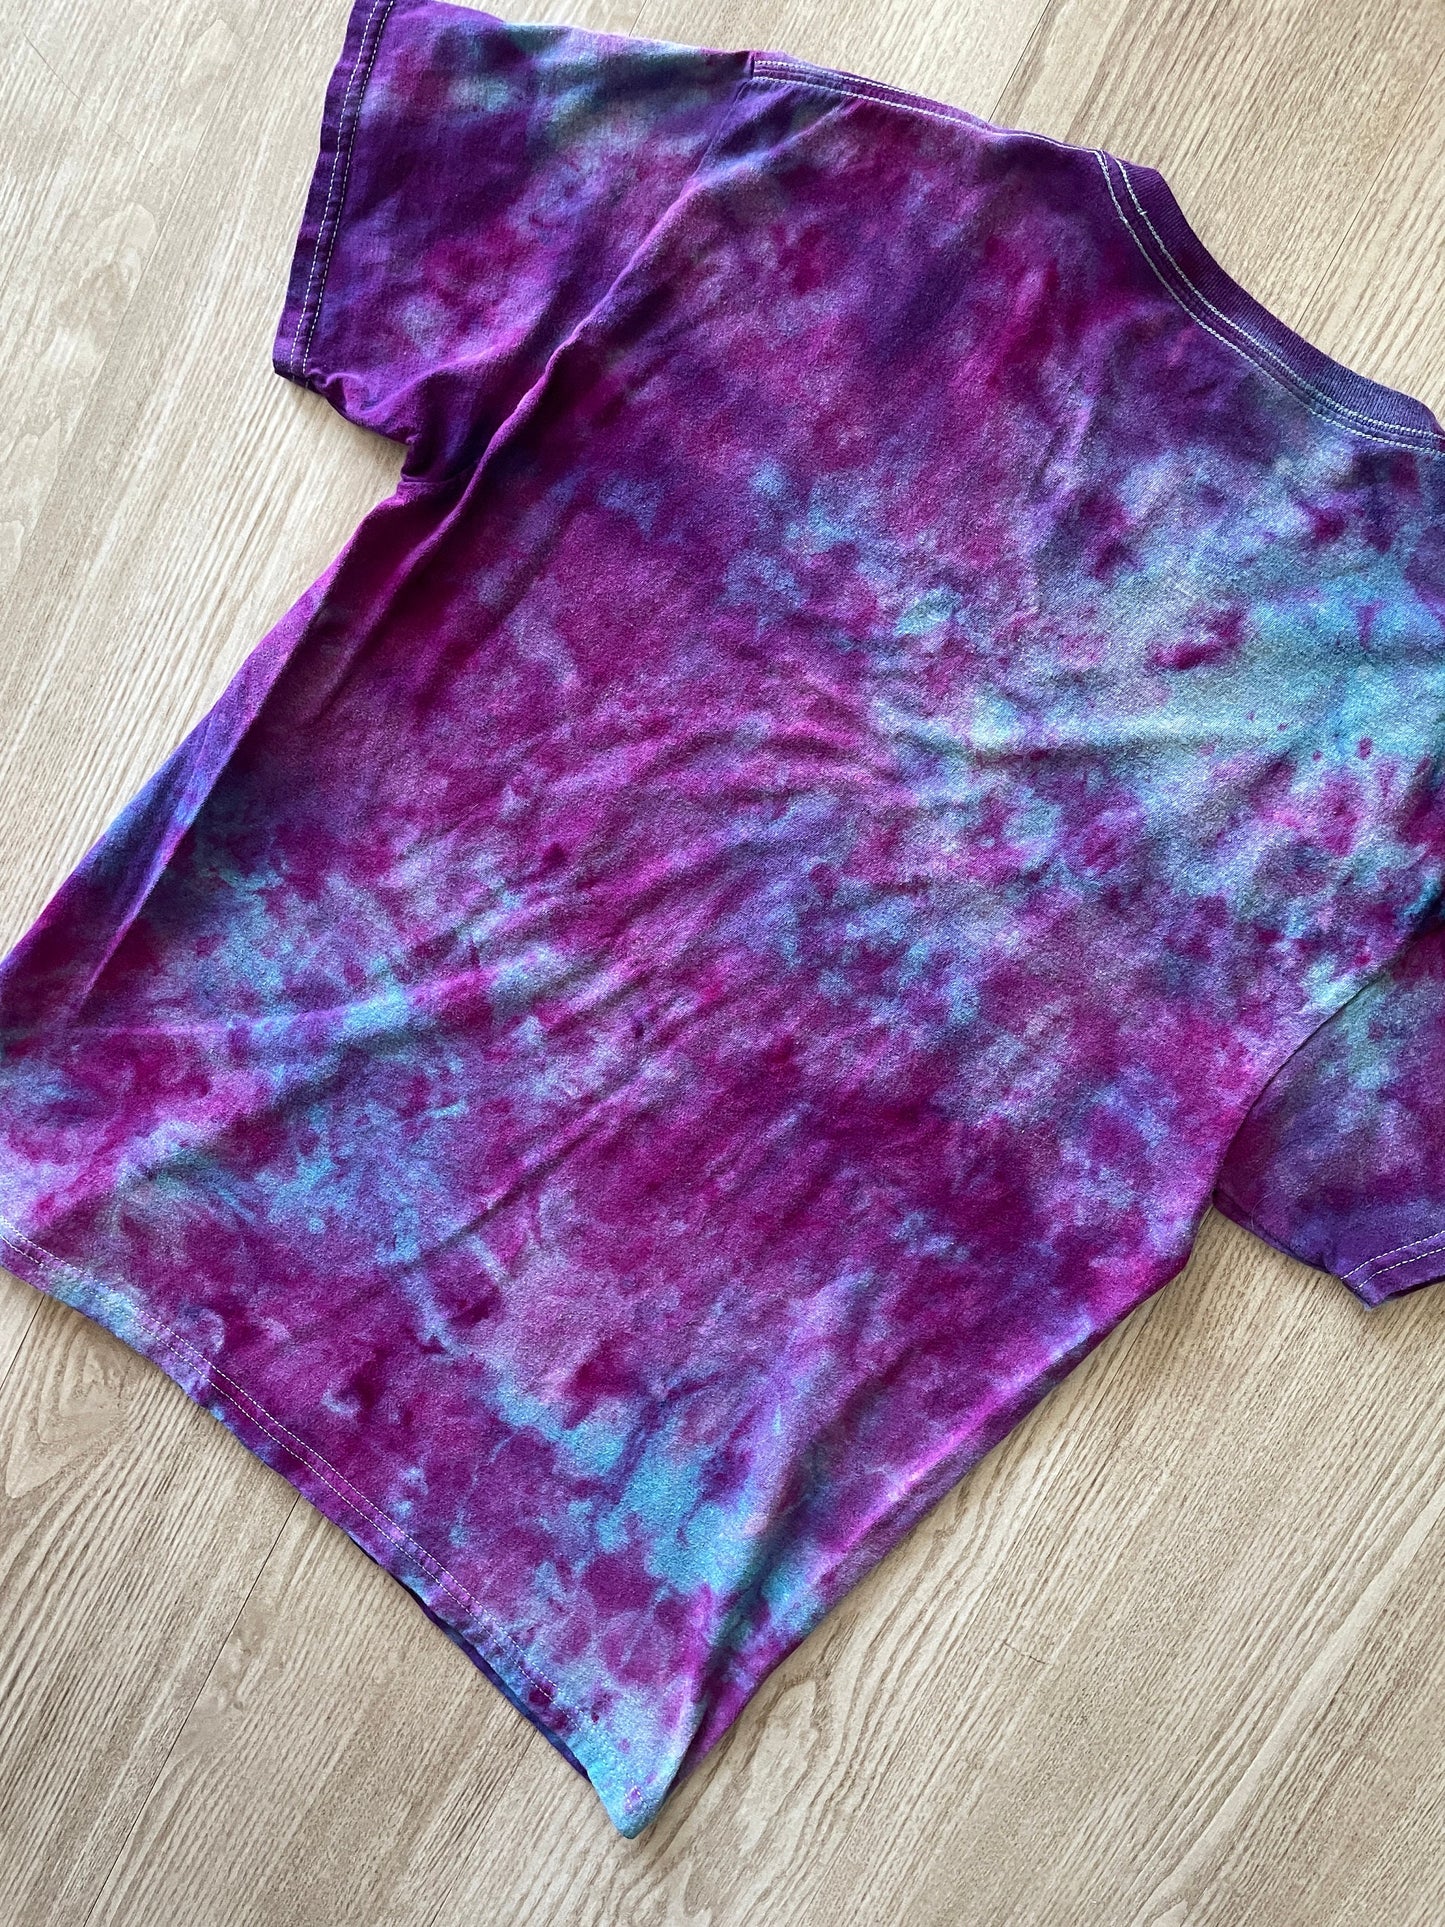 Medium Men's Hand-Printed Floral Galaxy Tie Dye Short Sleeve T-Shirt | Handmade One-Of-a-Kind Upcycled Blue, Purple, and Pink Ice Dye